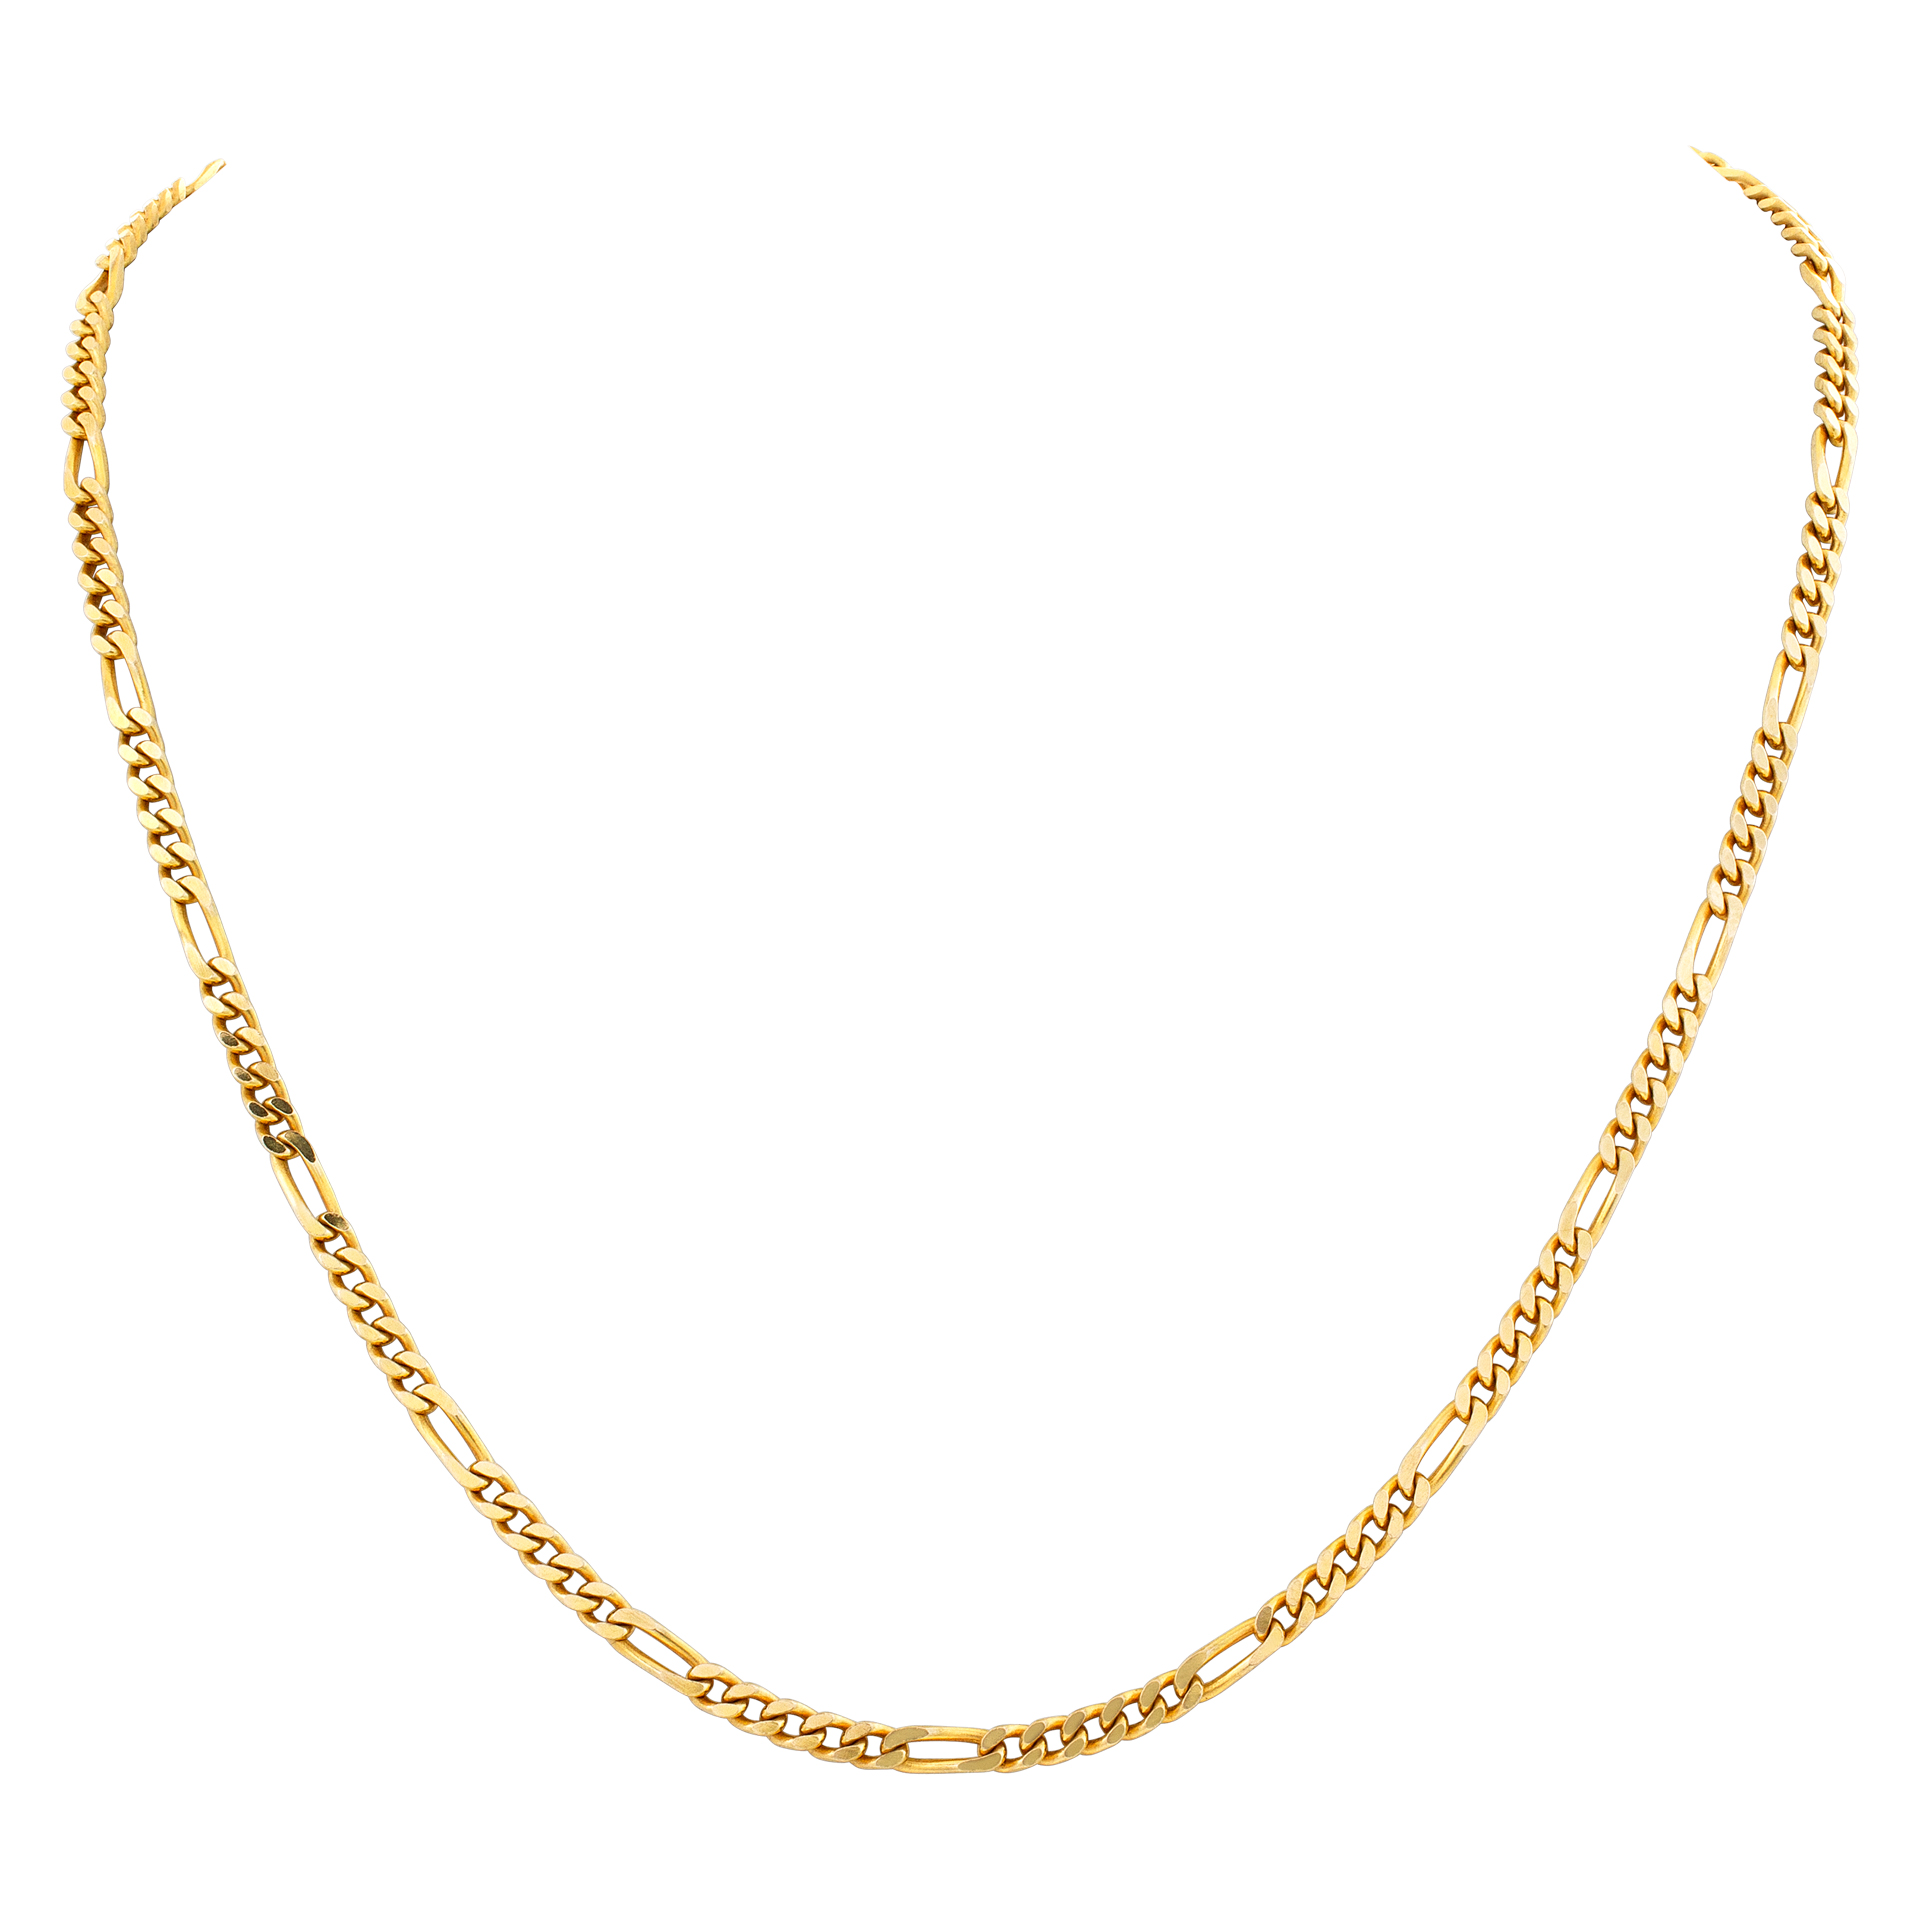 Figaro style link chain in 14k image 1